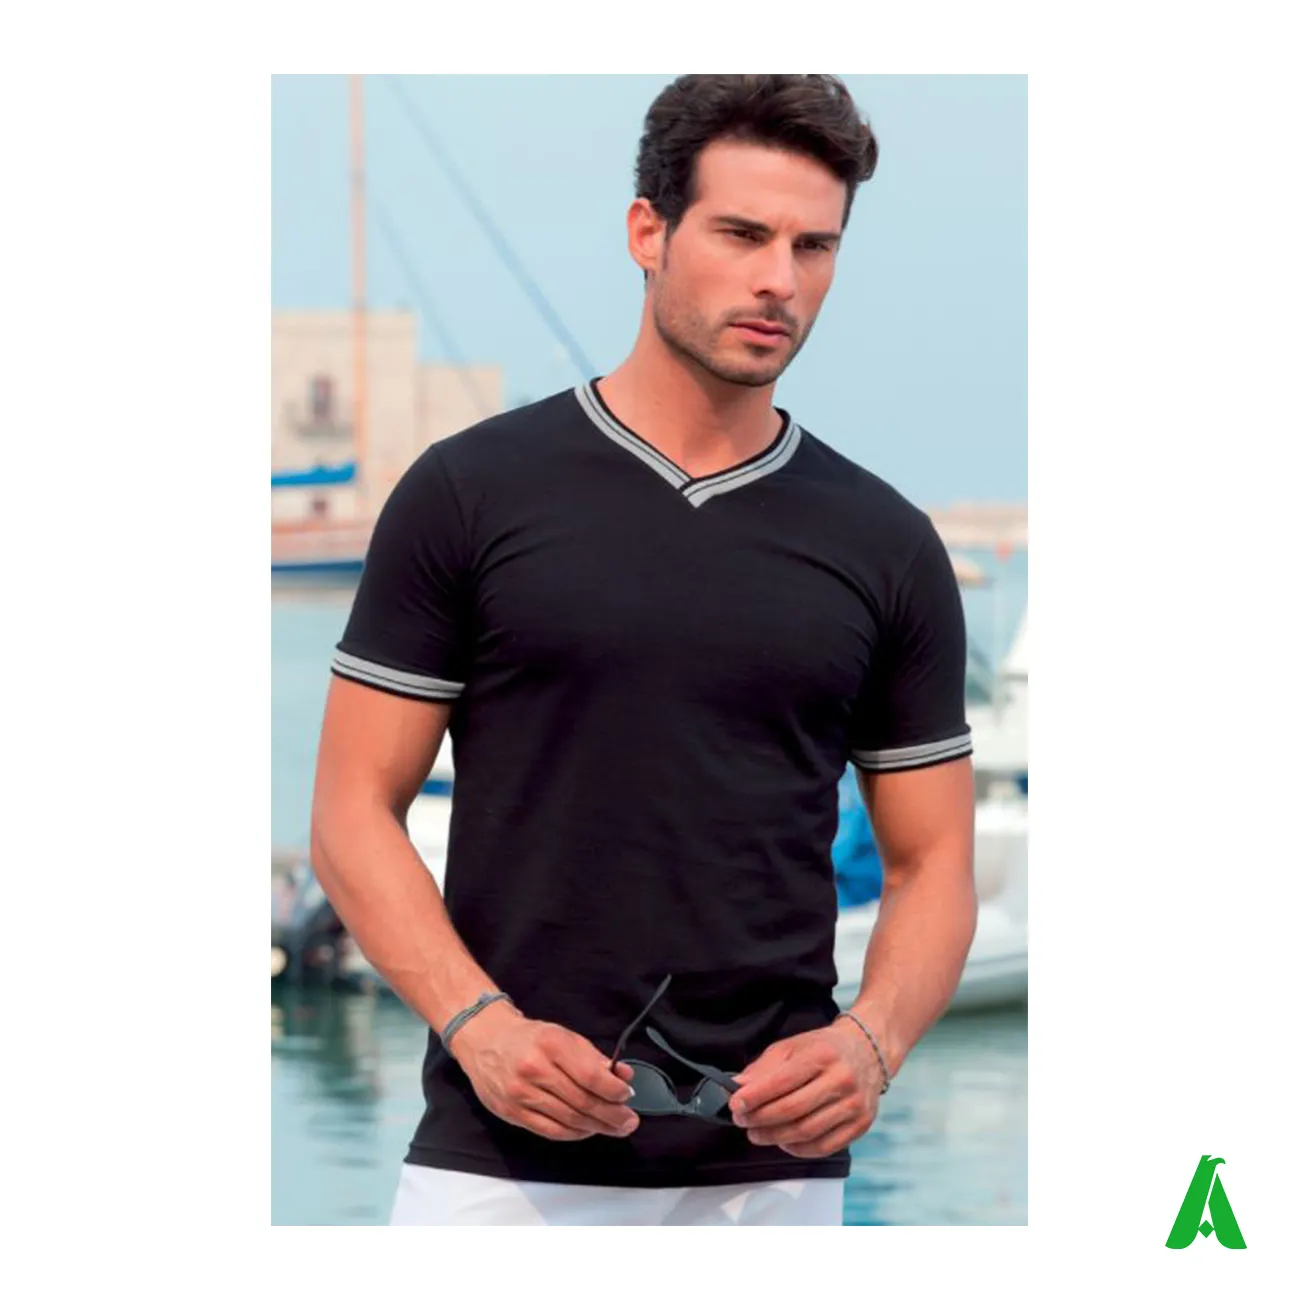 For B2B High Performance-Price Italy Casual 94% Cotton Customization Blank Printed Ratio T-Shirt V-Neck Cotton Shirts For Men